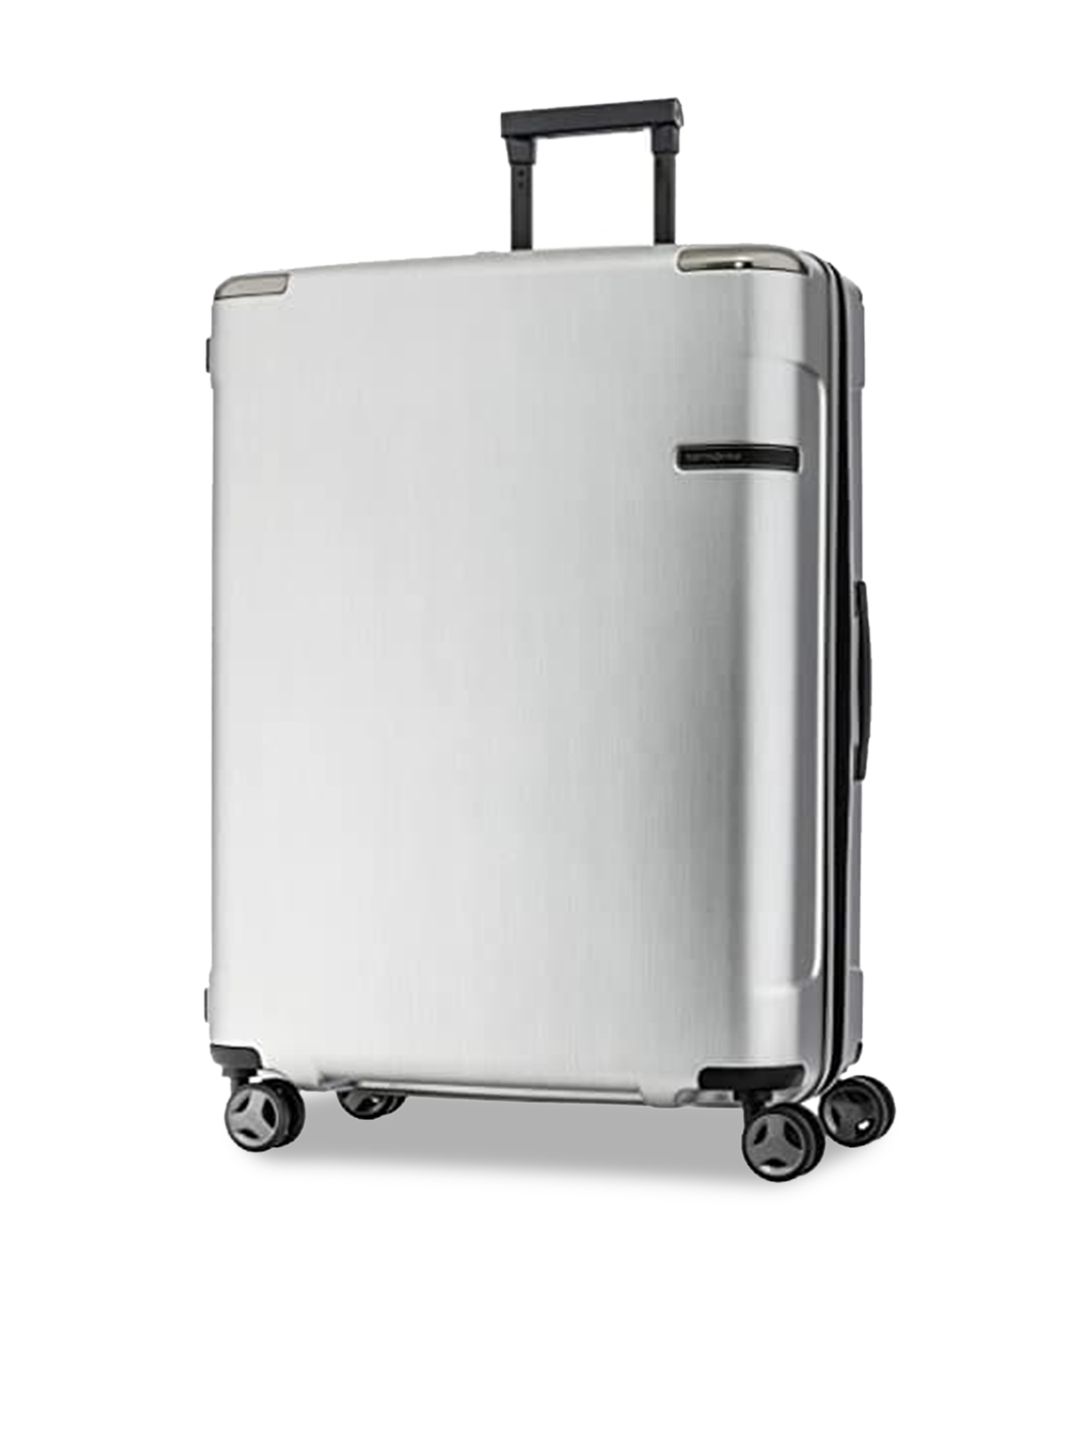 Samsonite Silver-Colored Solid Hard Sided Large Trolley Suitcase Price in India